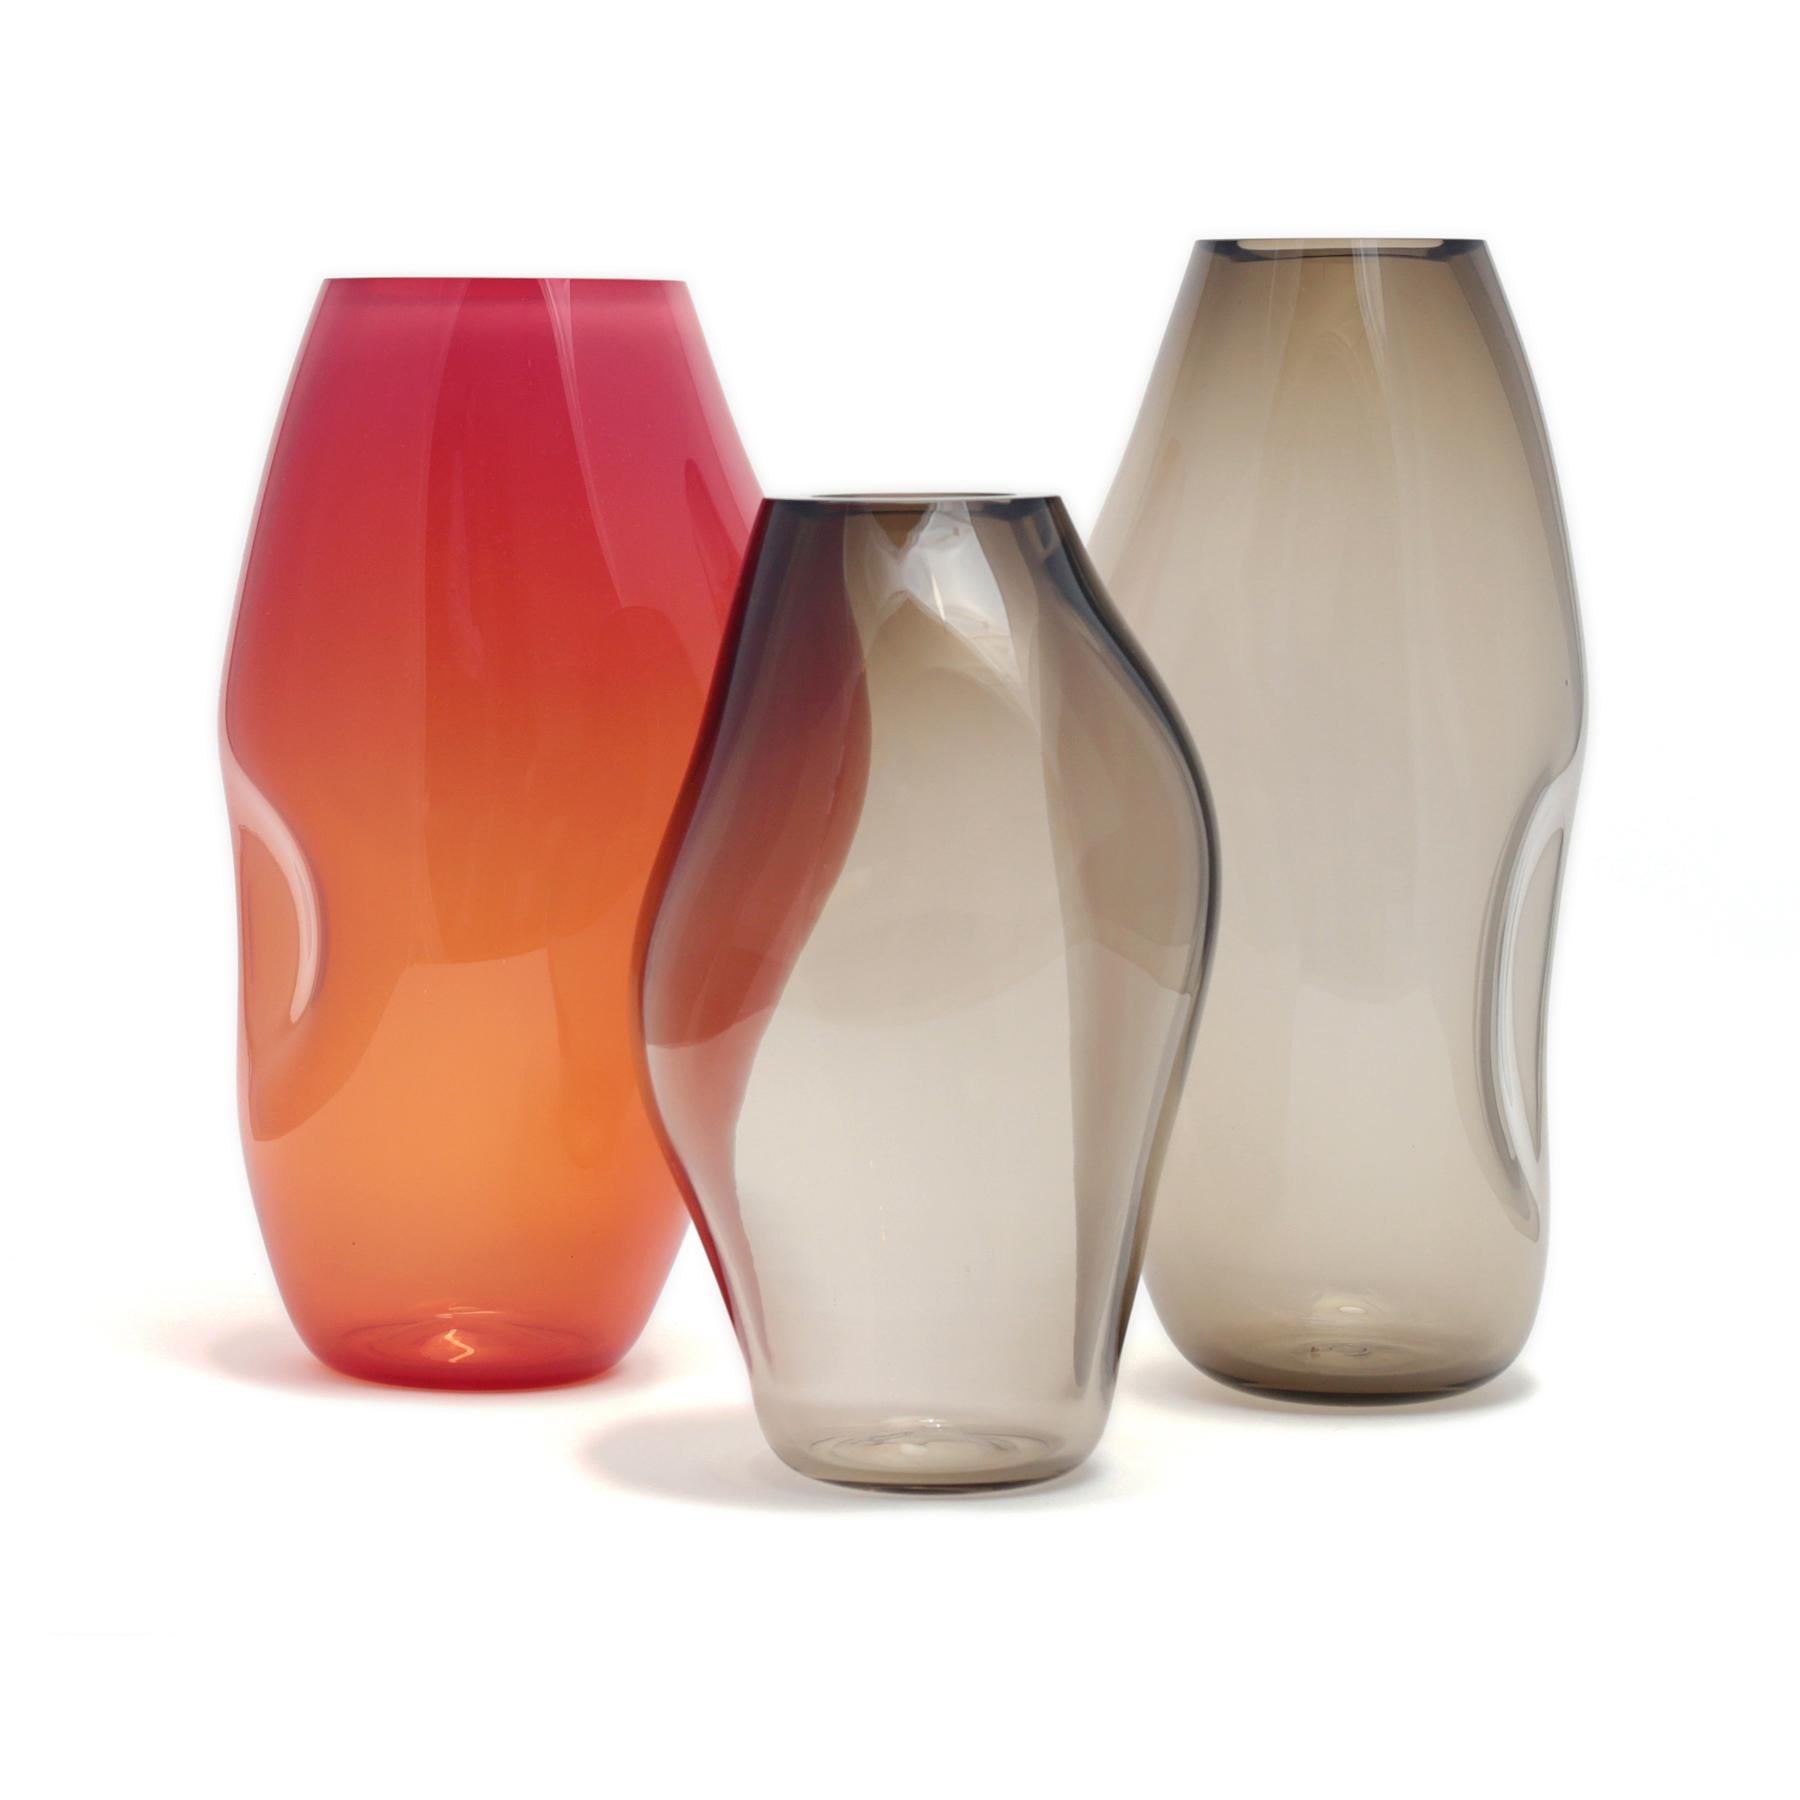 Set of 3 Supernova IV L/M/ L vases by ELOA
No UL listed 
Material: glass
Dimensions: D15 x W17 x H41 cm/ D15 x W17 x H36 cm
Also available in different colours and dimensions.

SUPERNOVA is a collection of vases and bowls that, though they don‘t